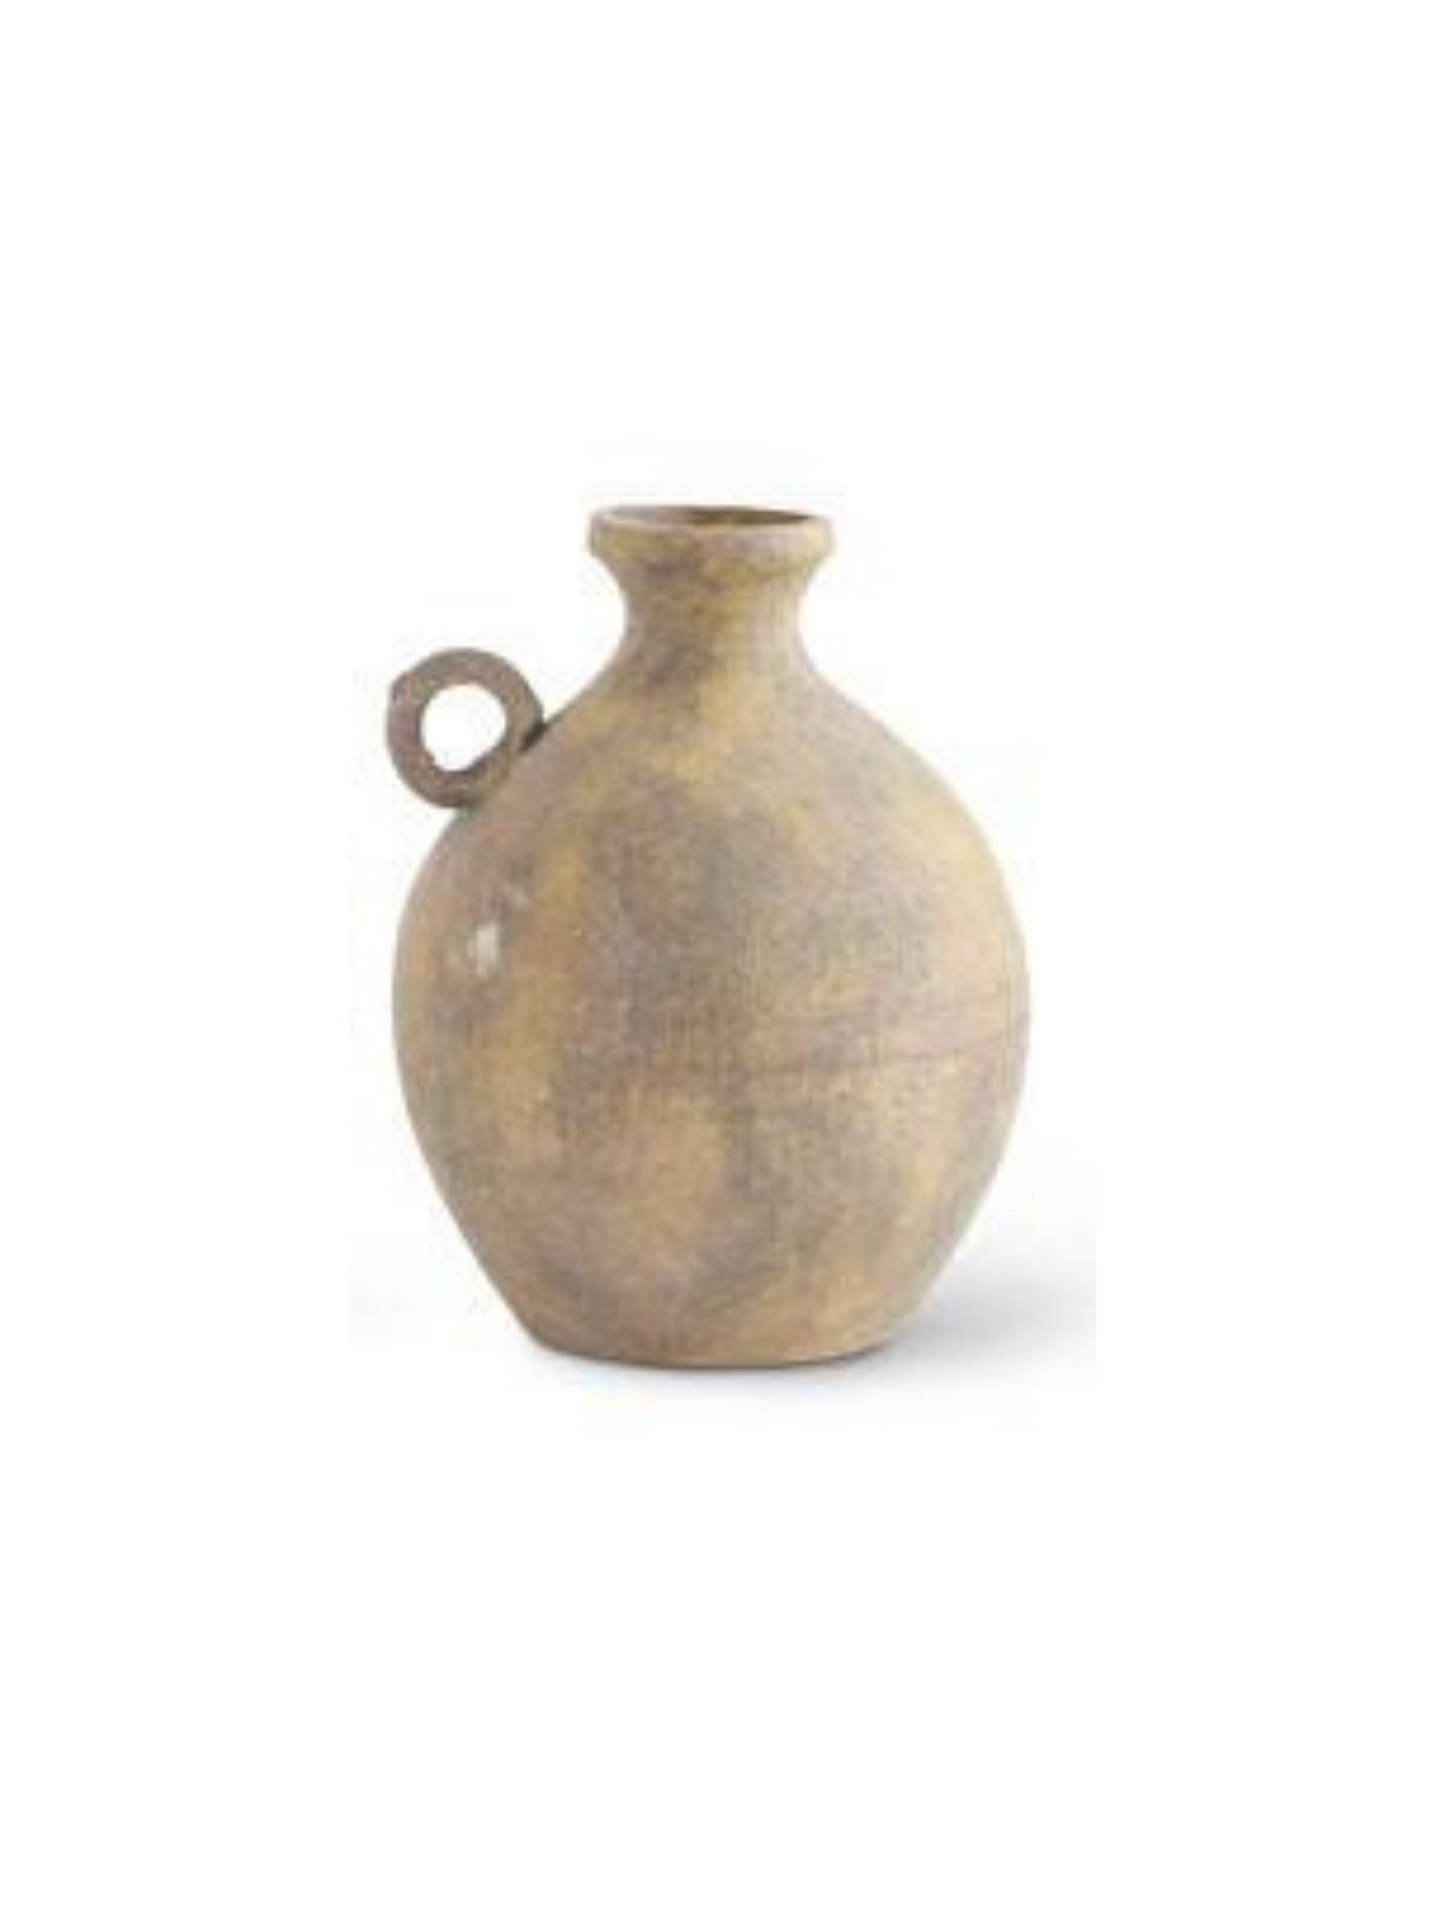 Old World Terracotta Ceramic Vases and Jugs